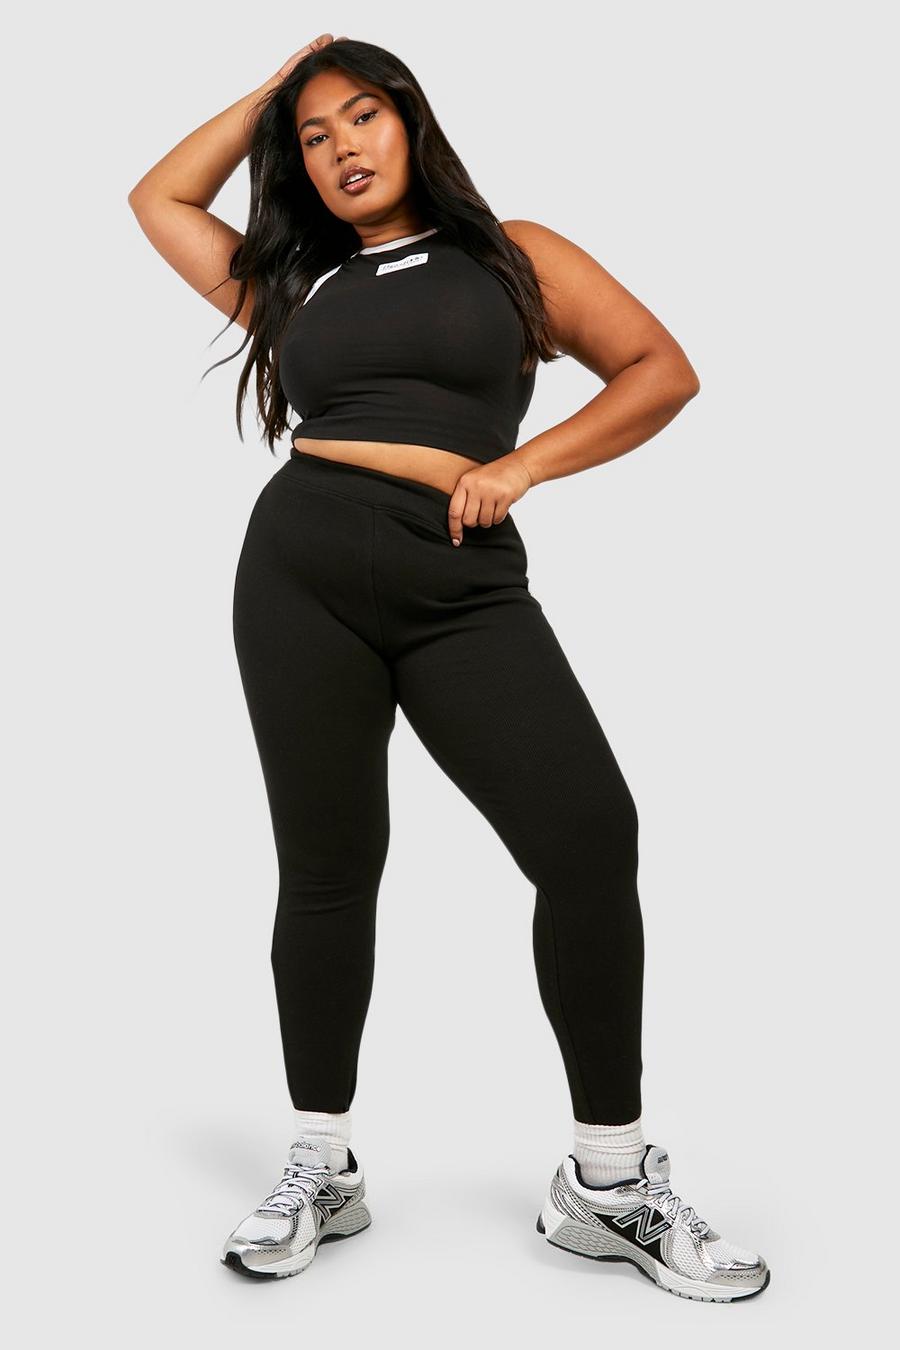 Plus Size High Waisted Cotton Leggings Made in the USA 5 Inch Waist Band  1XL 2XL 3XL 10 Colors FREE SHIPPING 